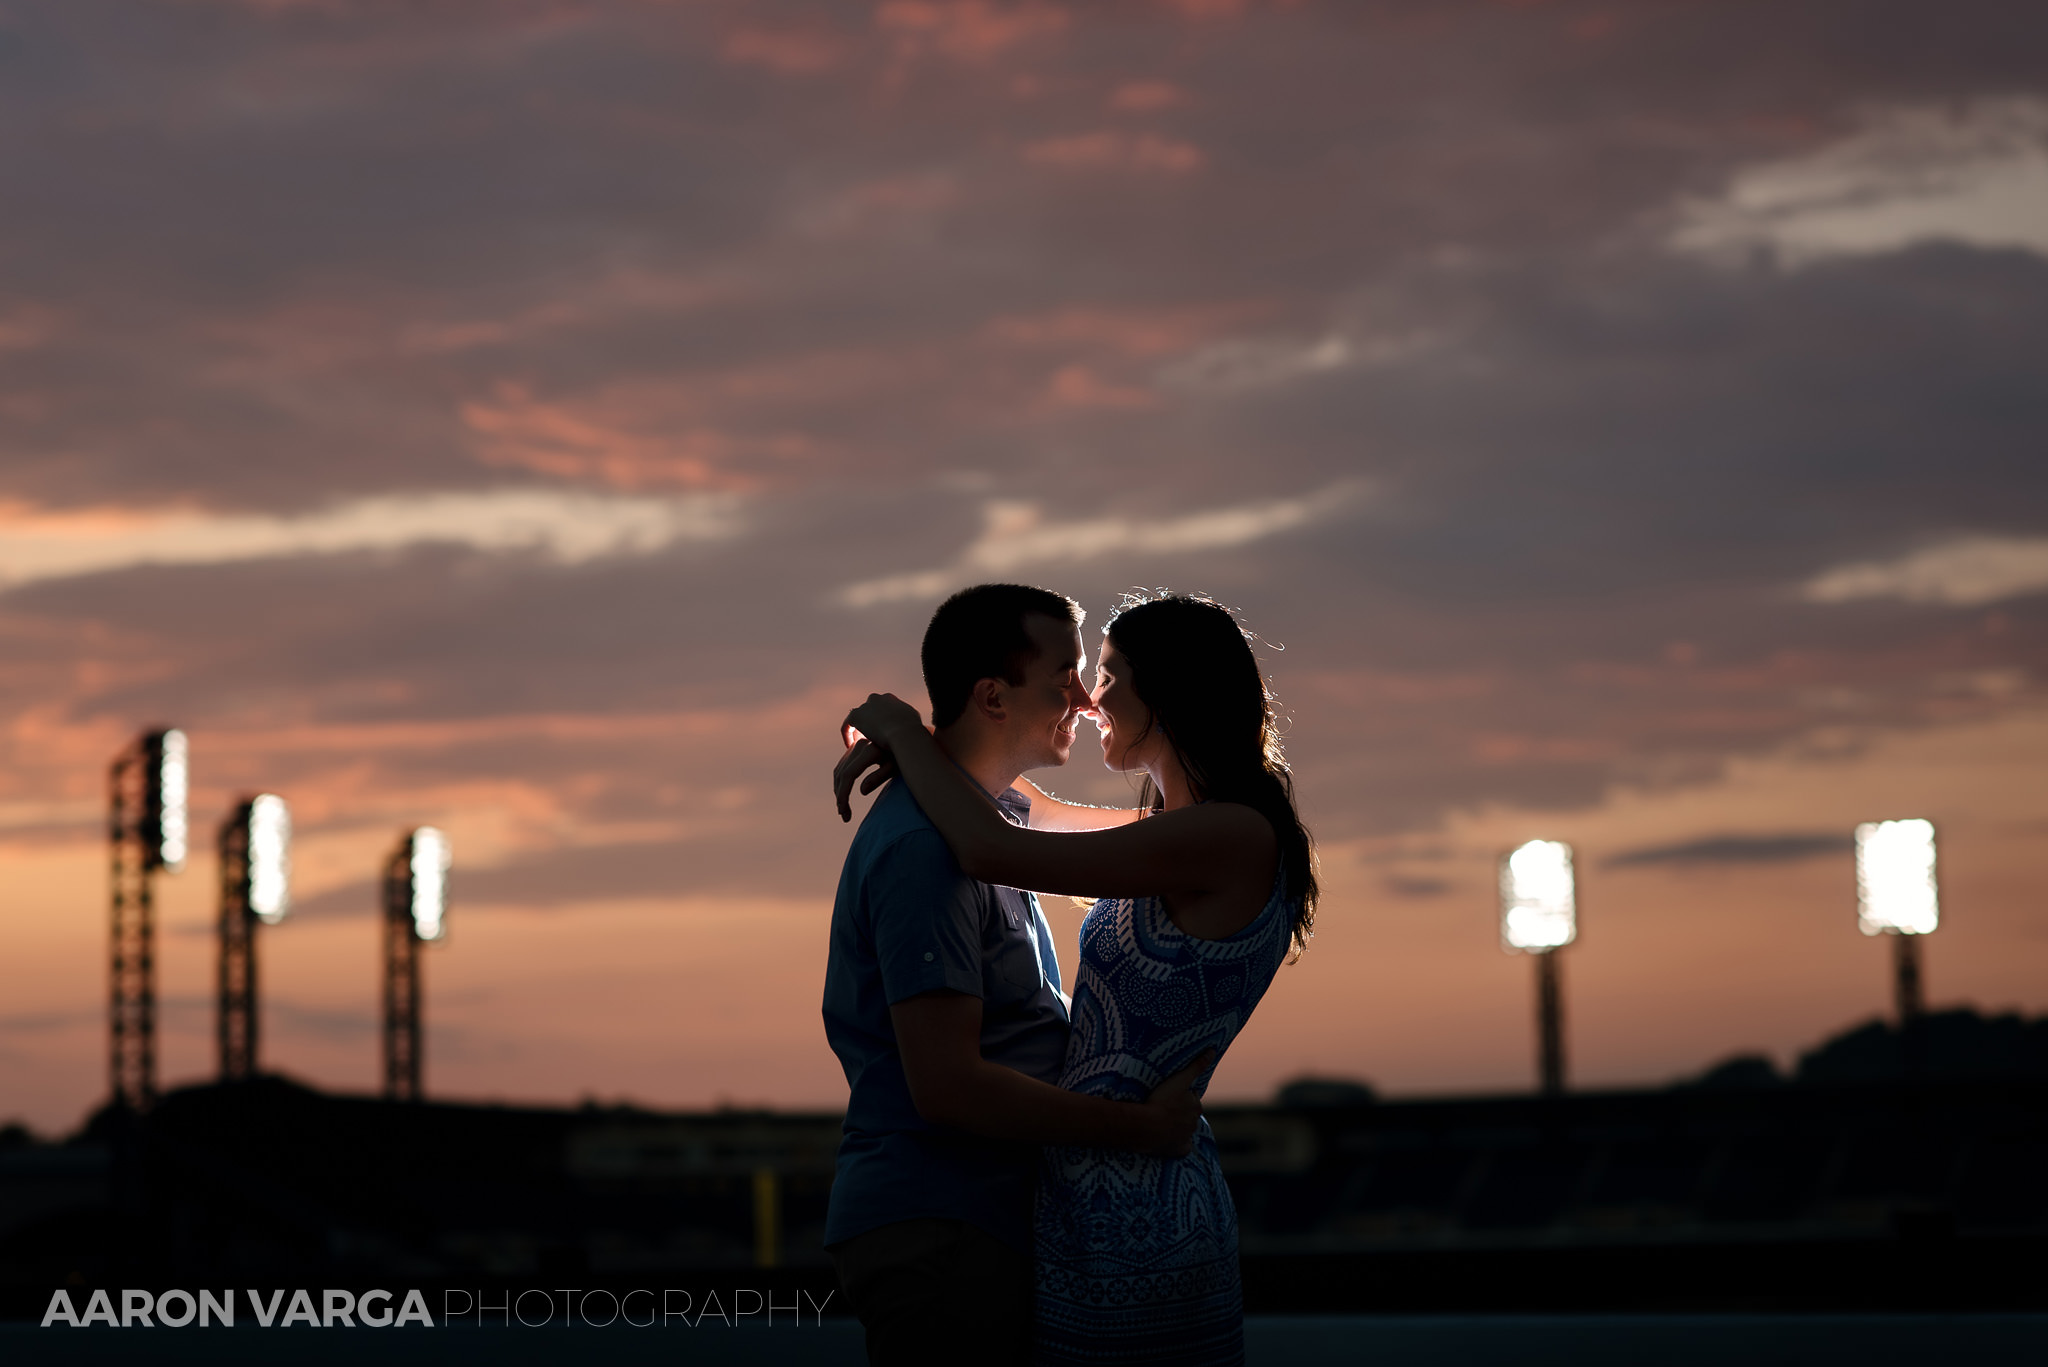 29 pnc park engagement photos sunset - Alexis + Luke | Downtown Pittsburgh and North Shore Engagement Photos